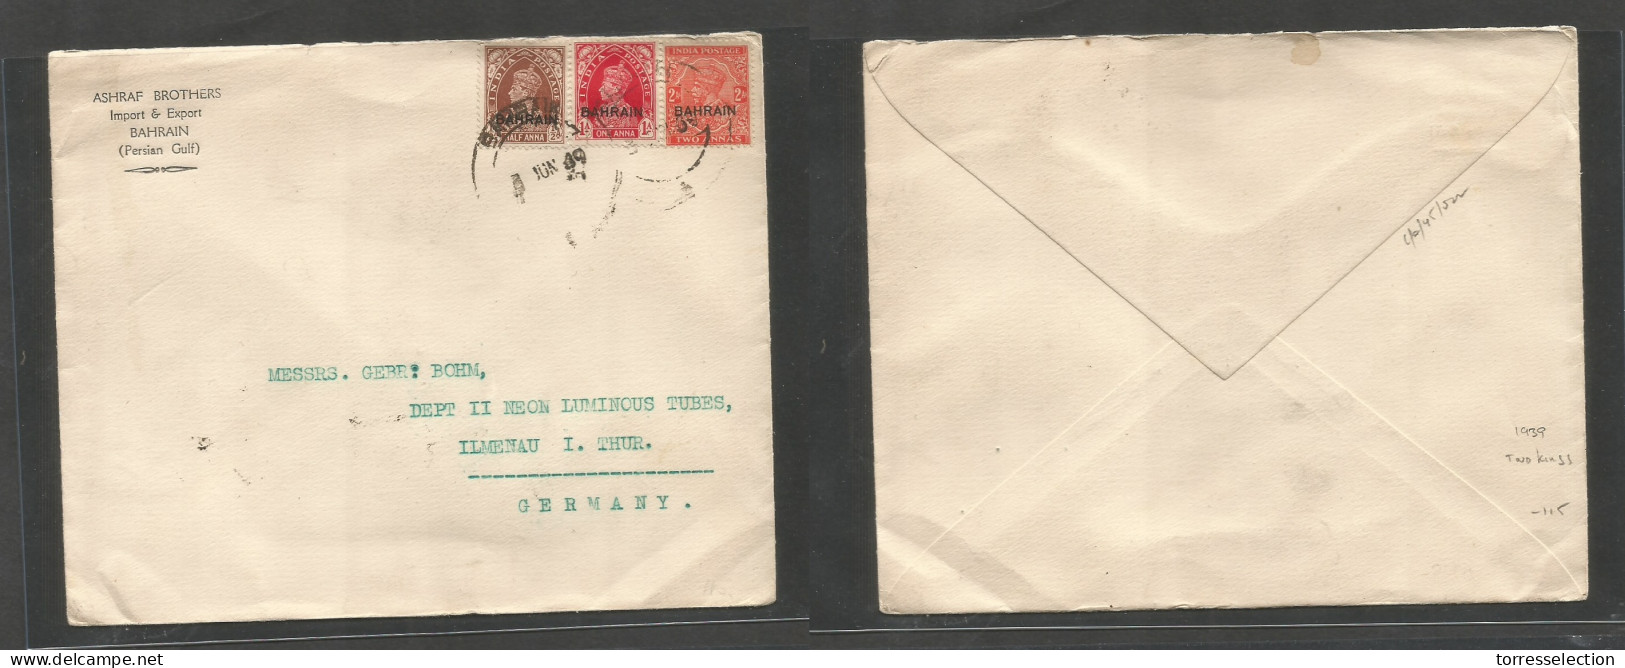 BAHRAIN. 1939 (3 June) GPO - Germany, Ilmenau. Tricolor Multifkd Envelope, Tied Cds. Two Kings Combination Usage, At 3 1 - Bahrein (1965-...)